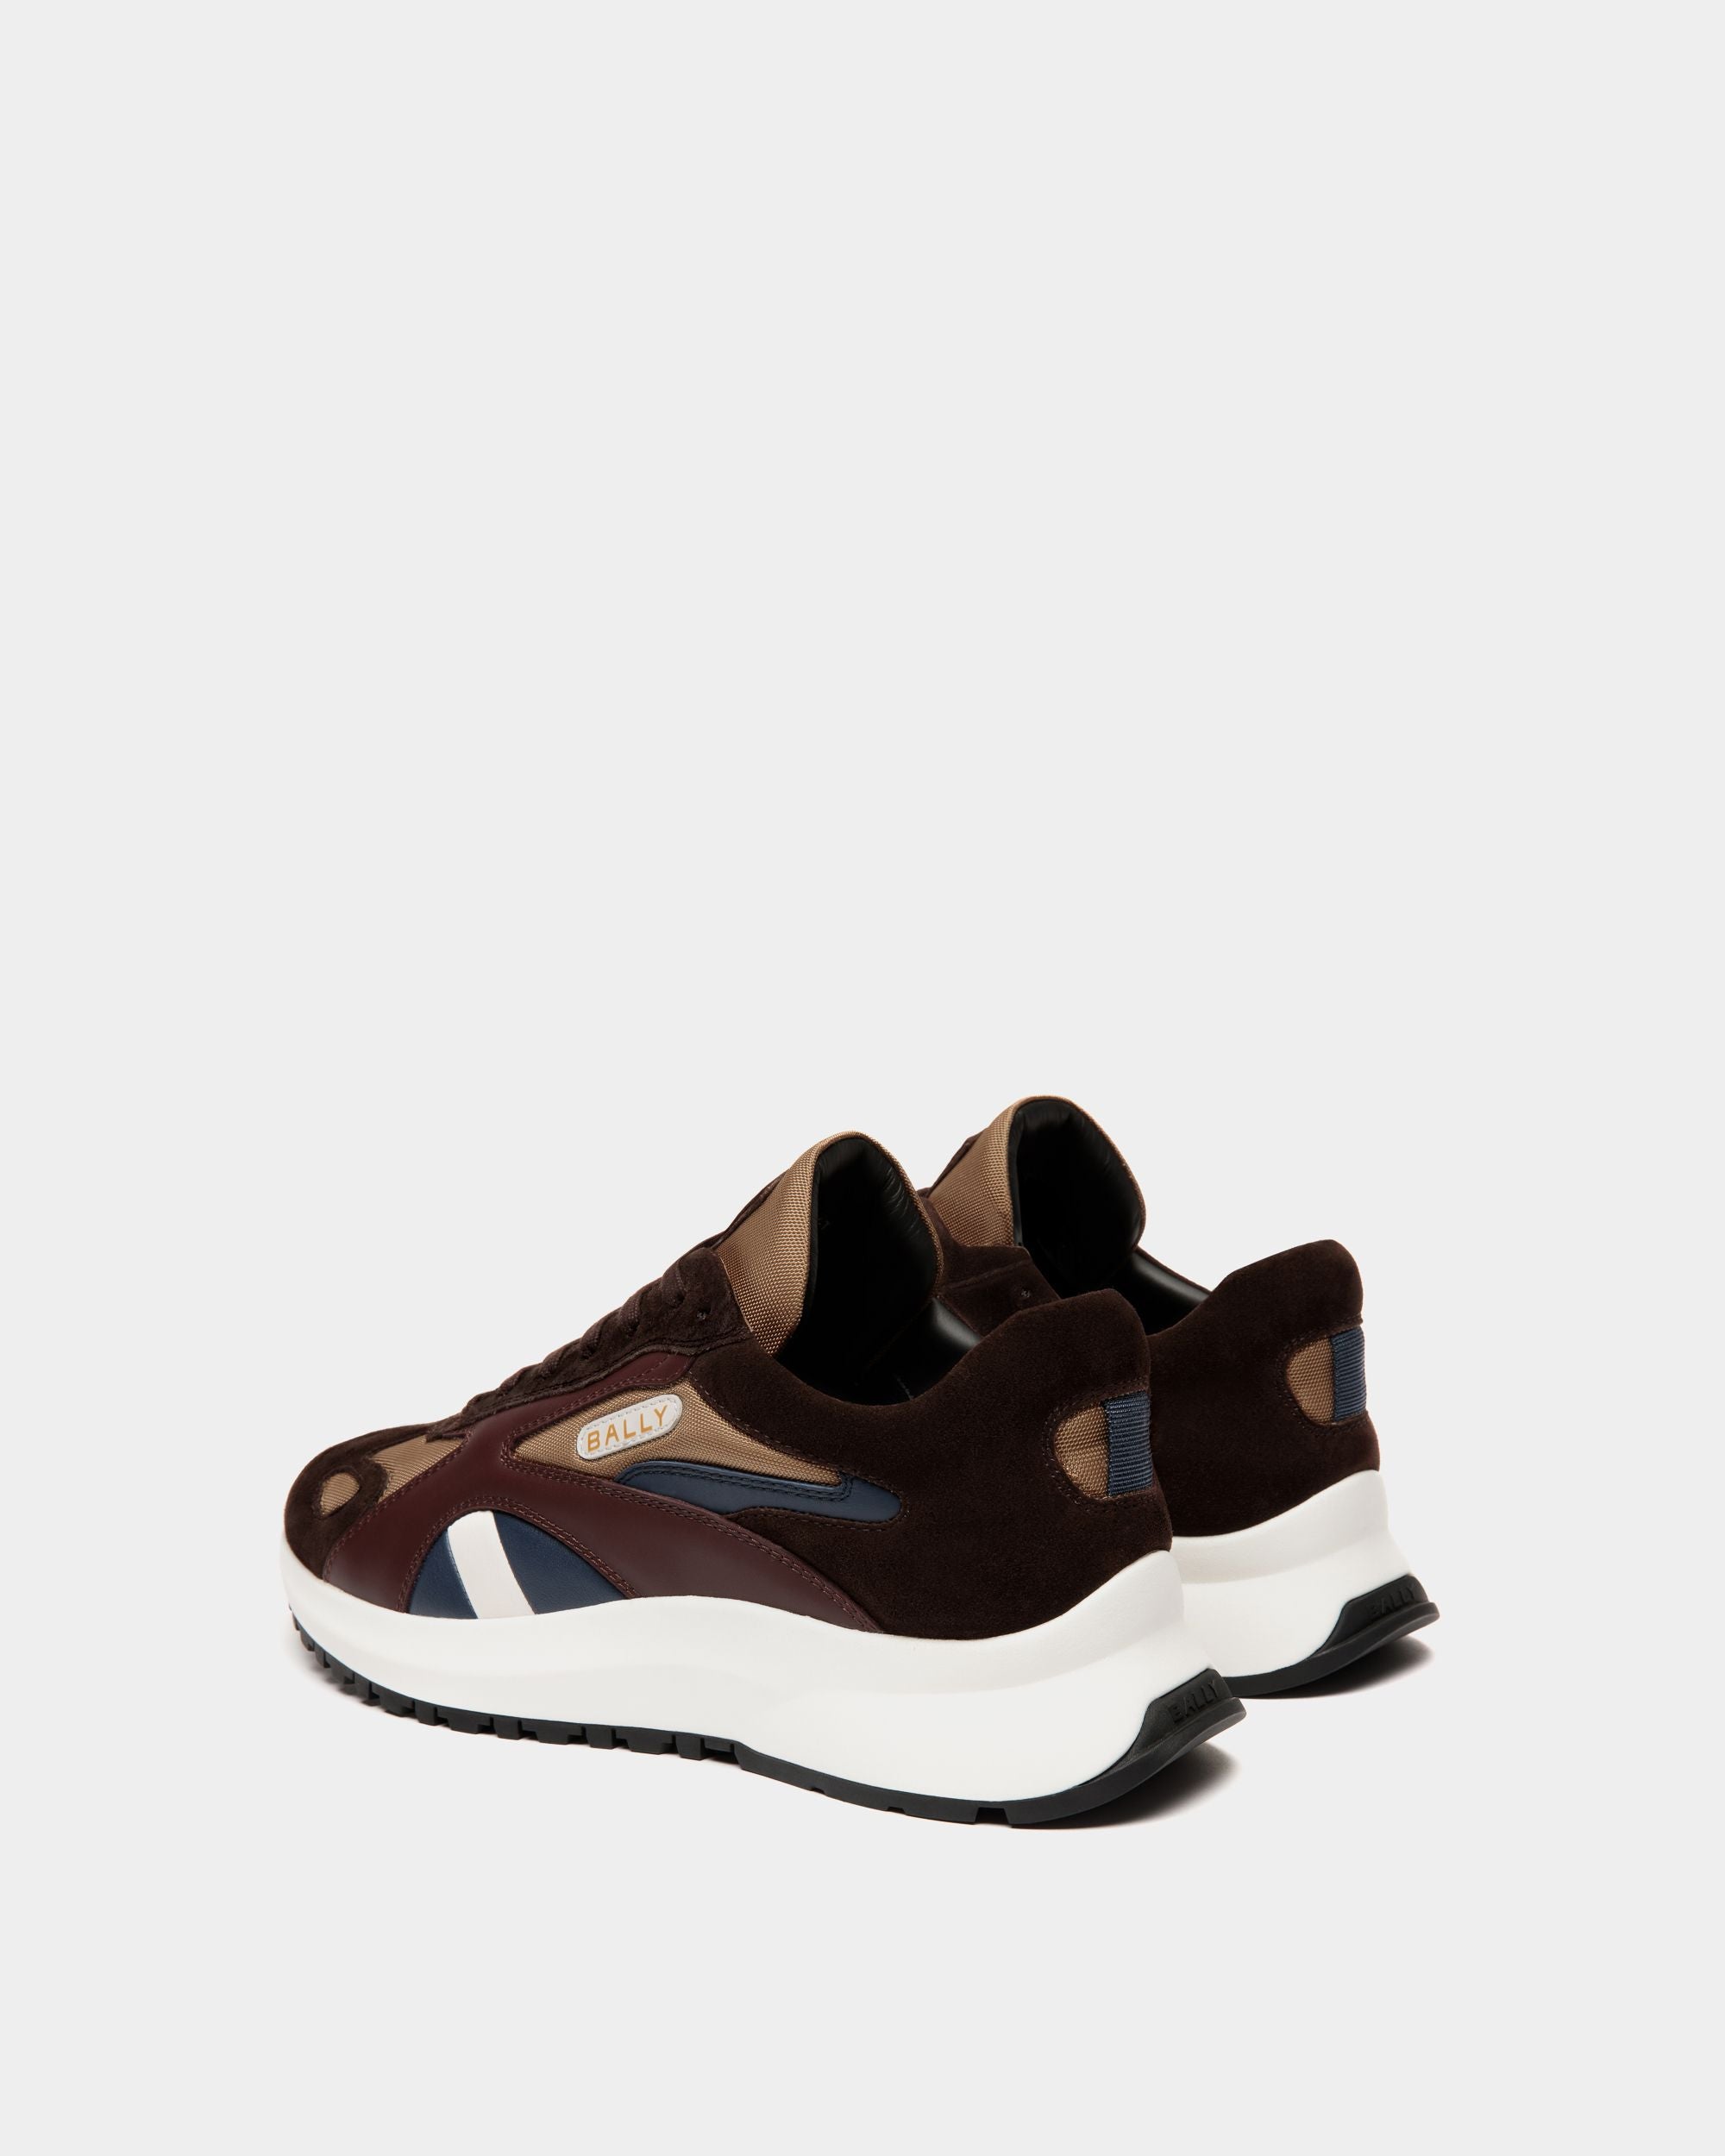 Outline | Men's Sneaker in Multicolor Nylon and Leather | Bally | Still Life 3/4 Front